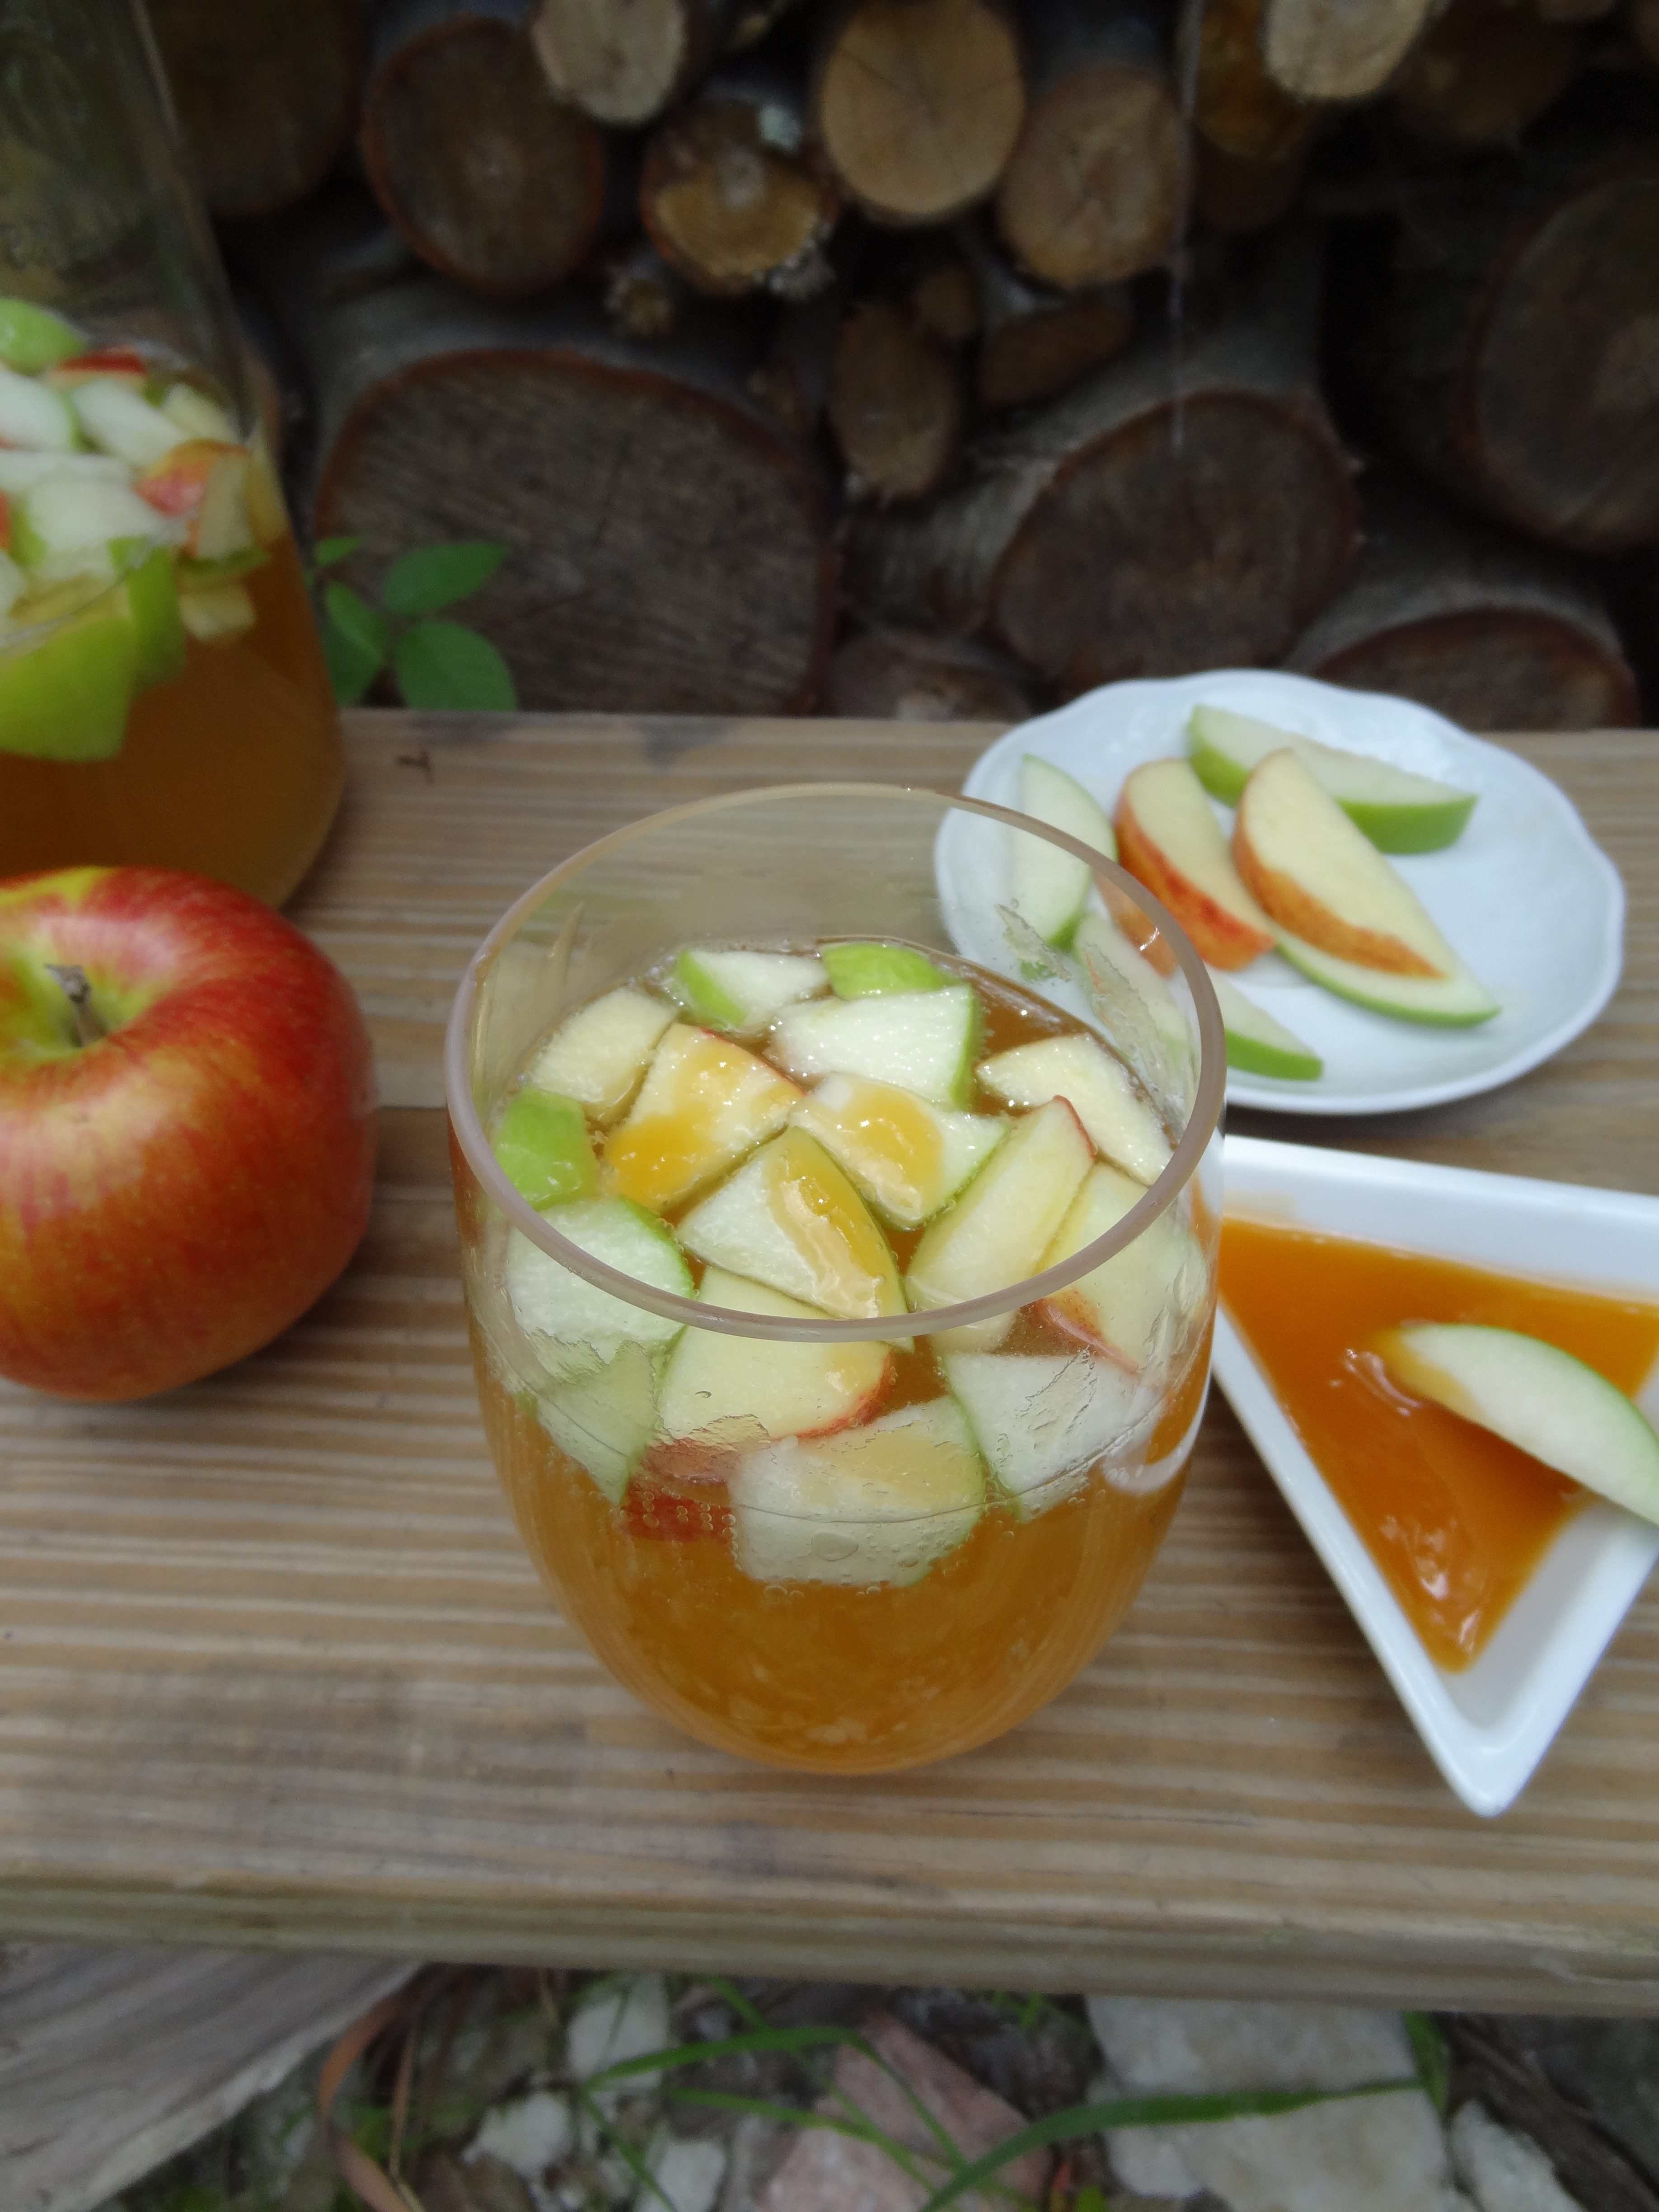 Welcome Autumn with these delicious Sparkling Apple Cider Drinks - The perfect way to celebrate! #falldrinks #apple